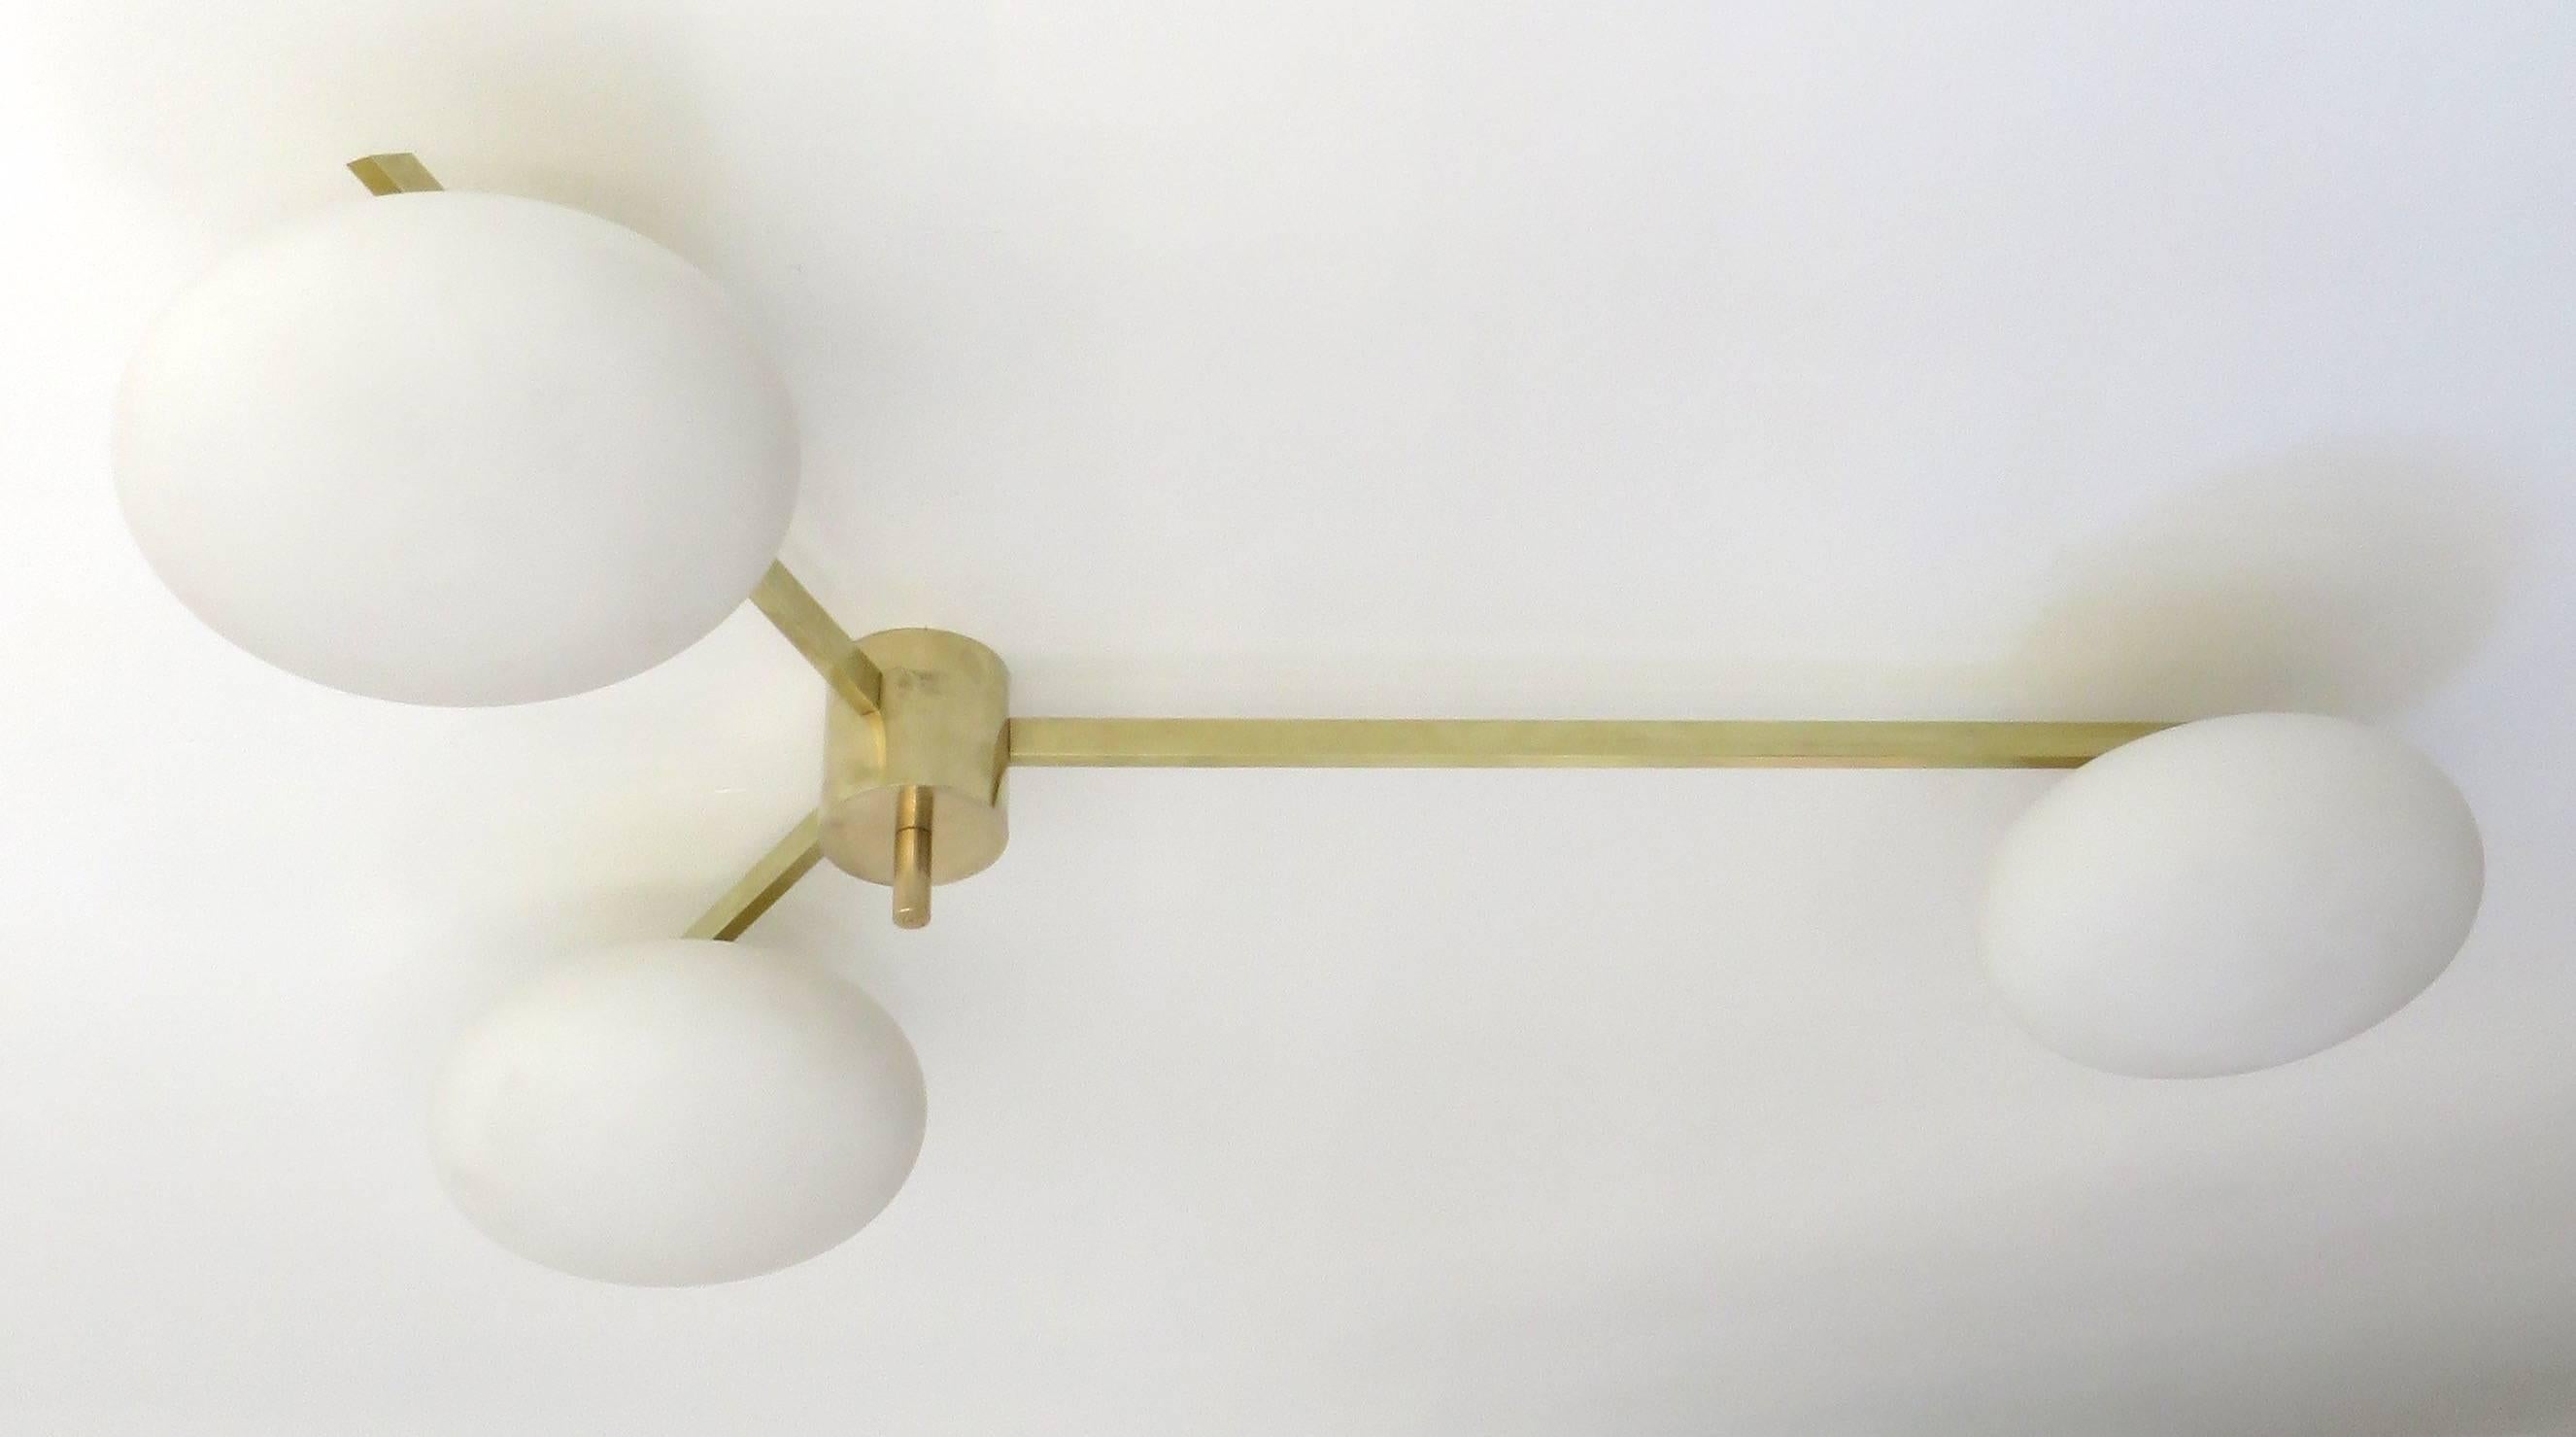 Angelo Lelli Italian three-arm brass and opaque opaline glass ceiling or wall light for Arredoluce, Italy, circa 1950-1960.
Original patina. Signed with makers mark to finial.
Bronze with opaque opaline glass shades. 
Shown in detail shot with